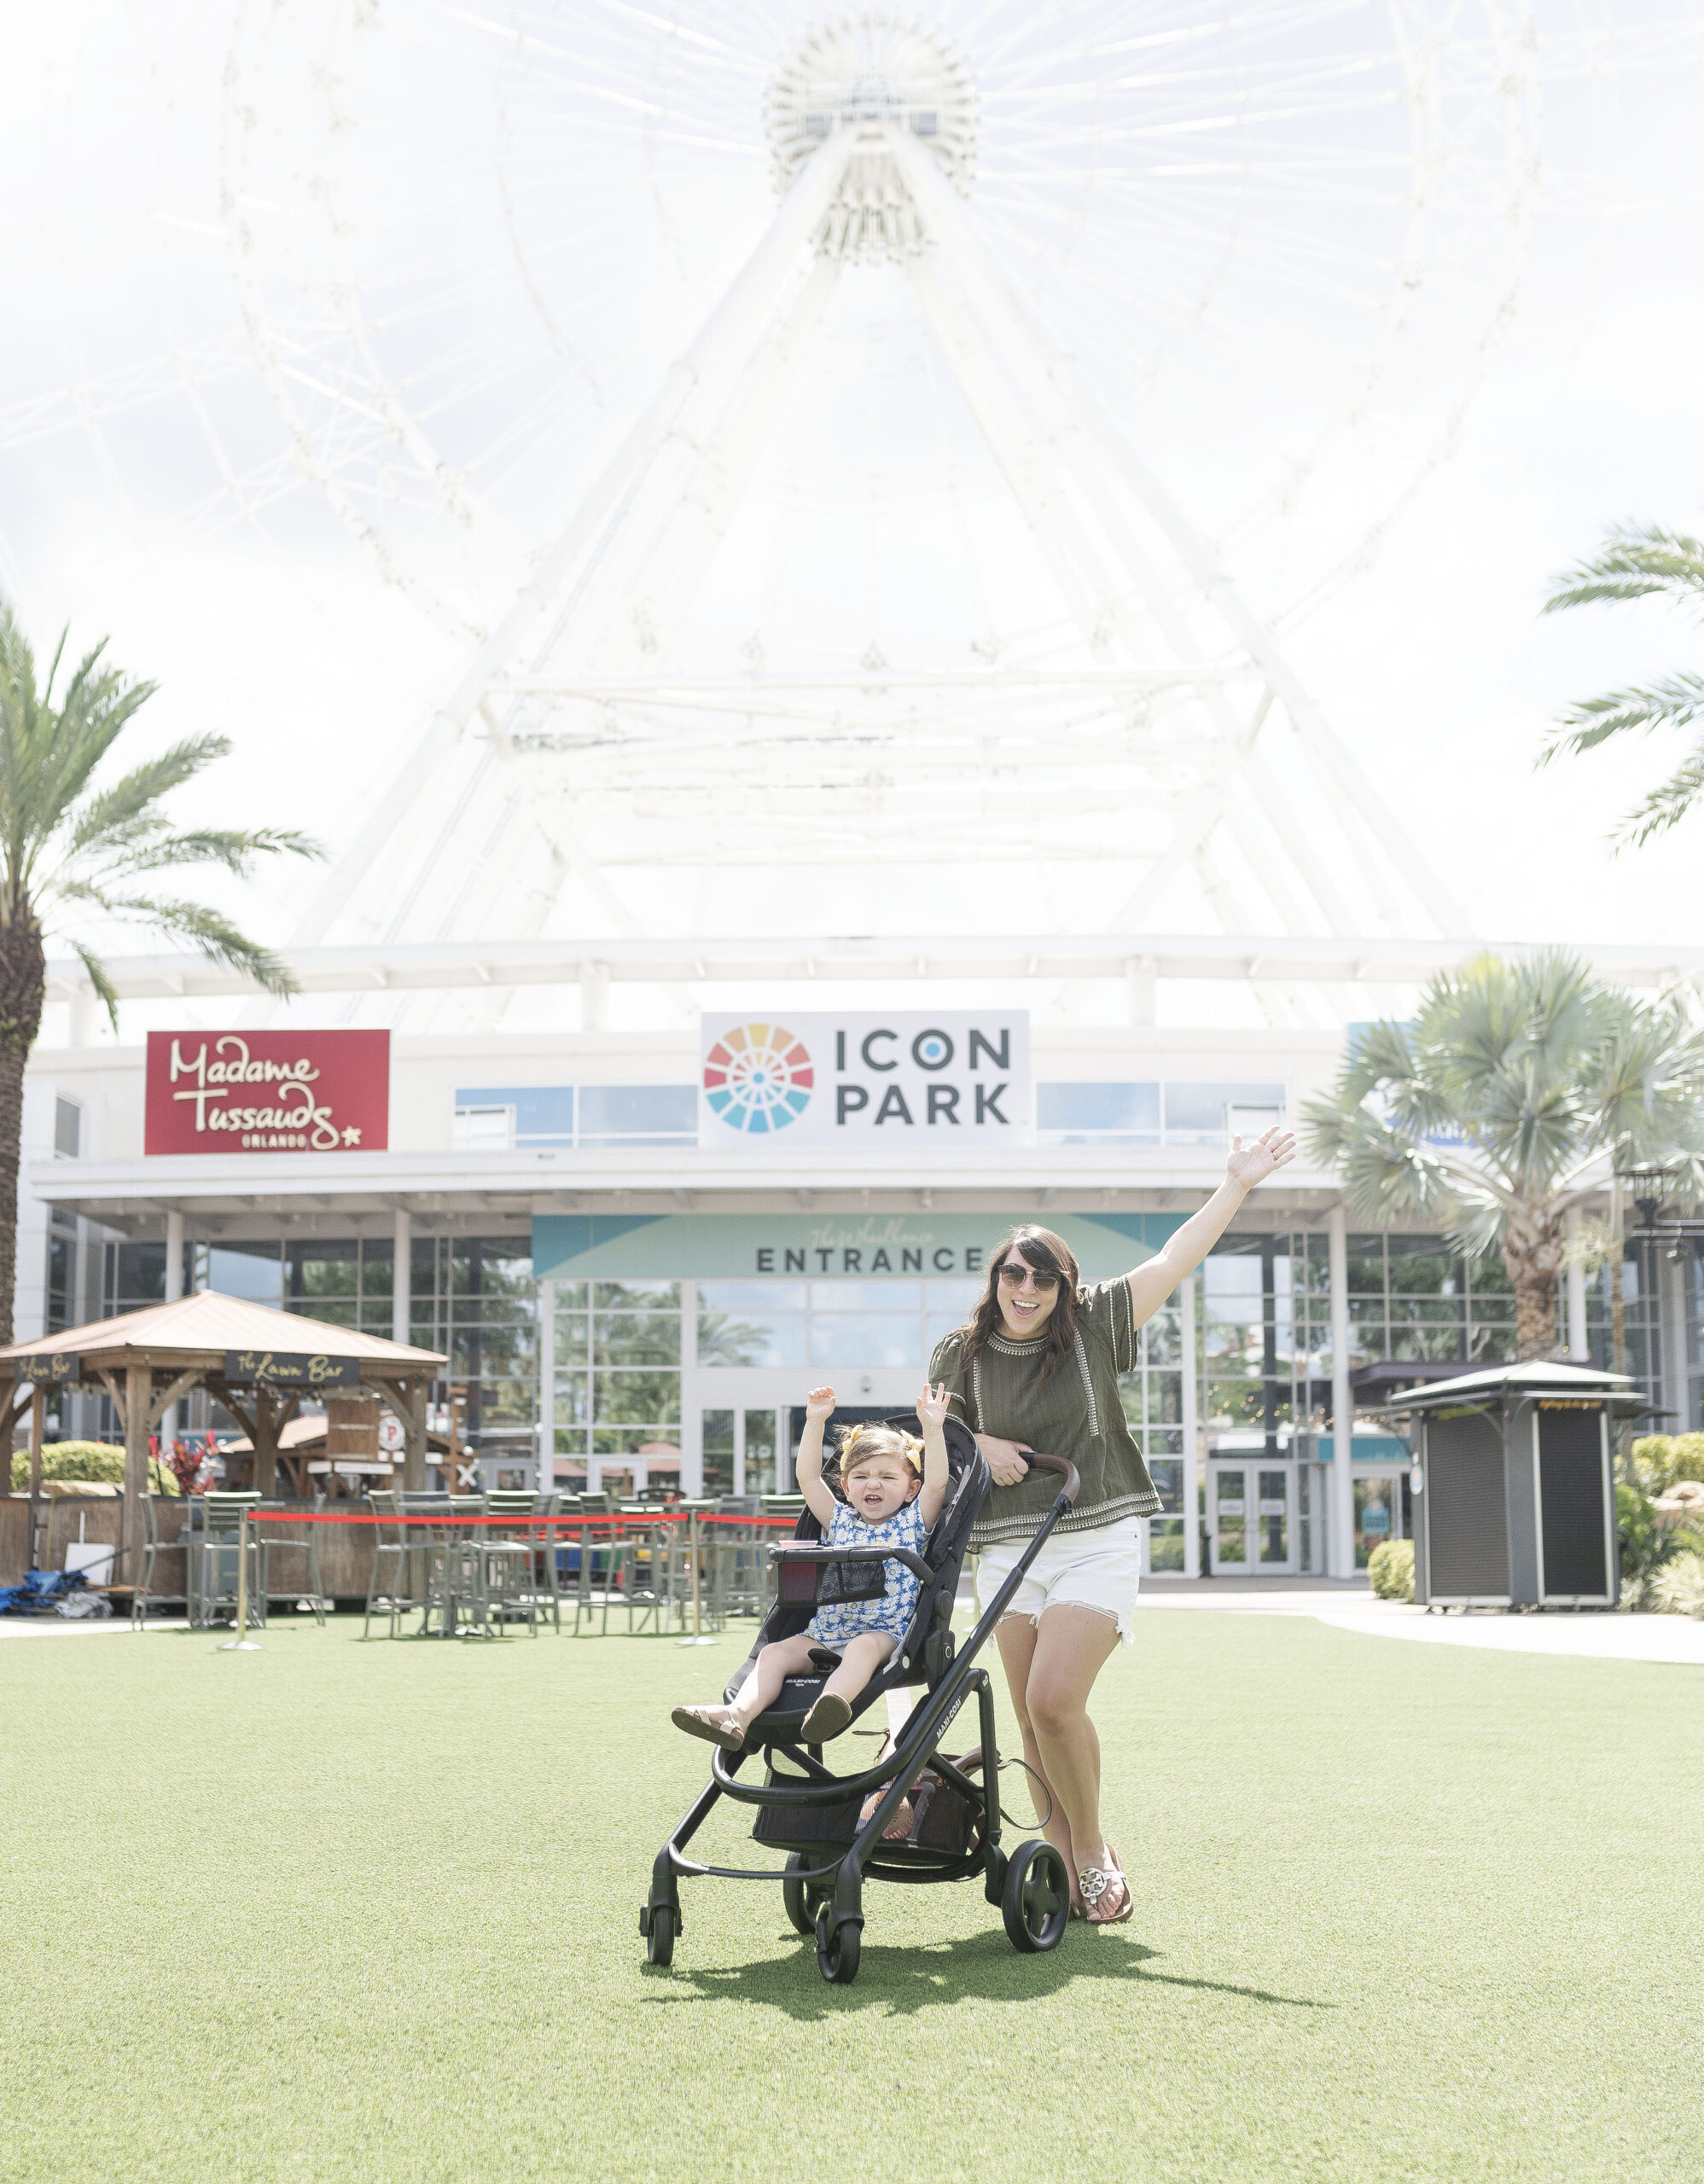 ICON Park Orlando, Brittney Naylor and daughter posing in front of the Orlando Eye, The Wheel